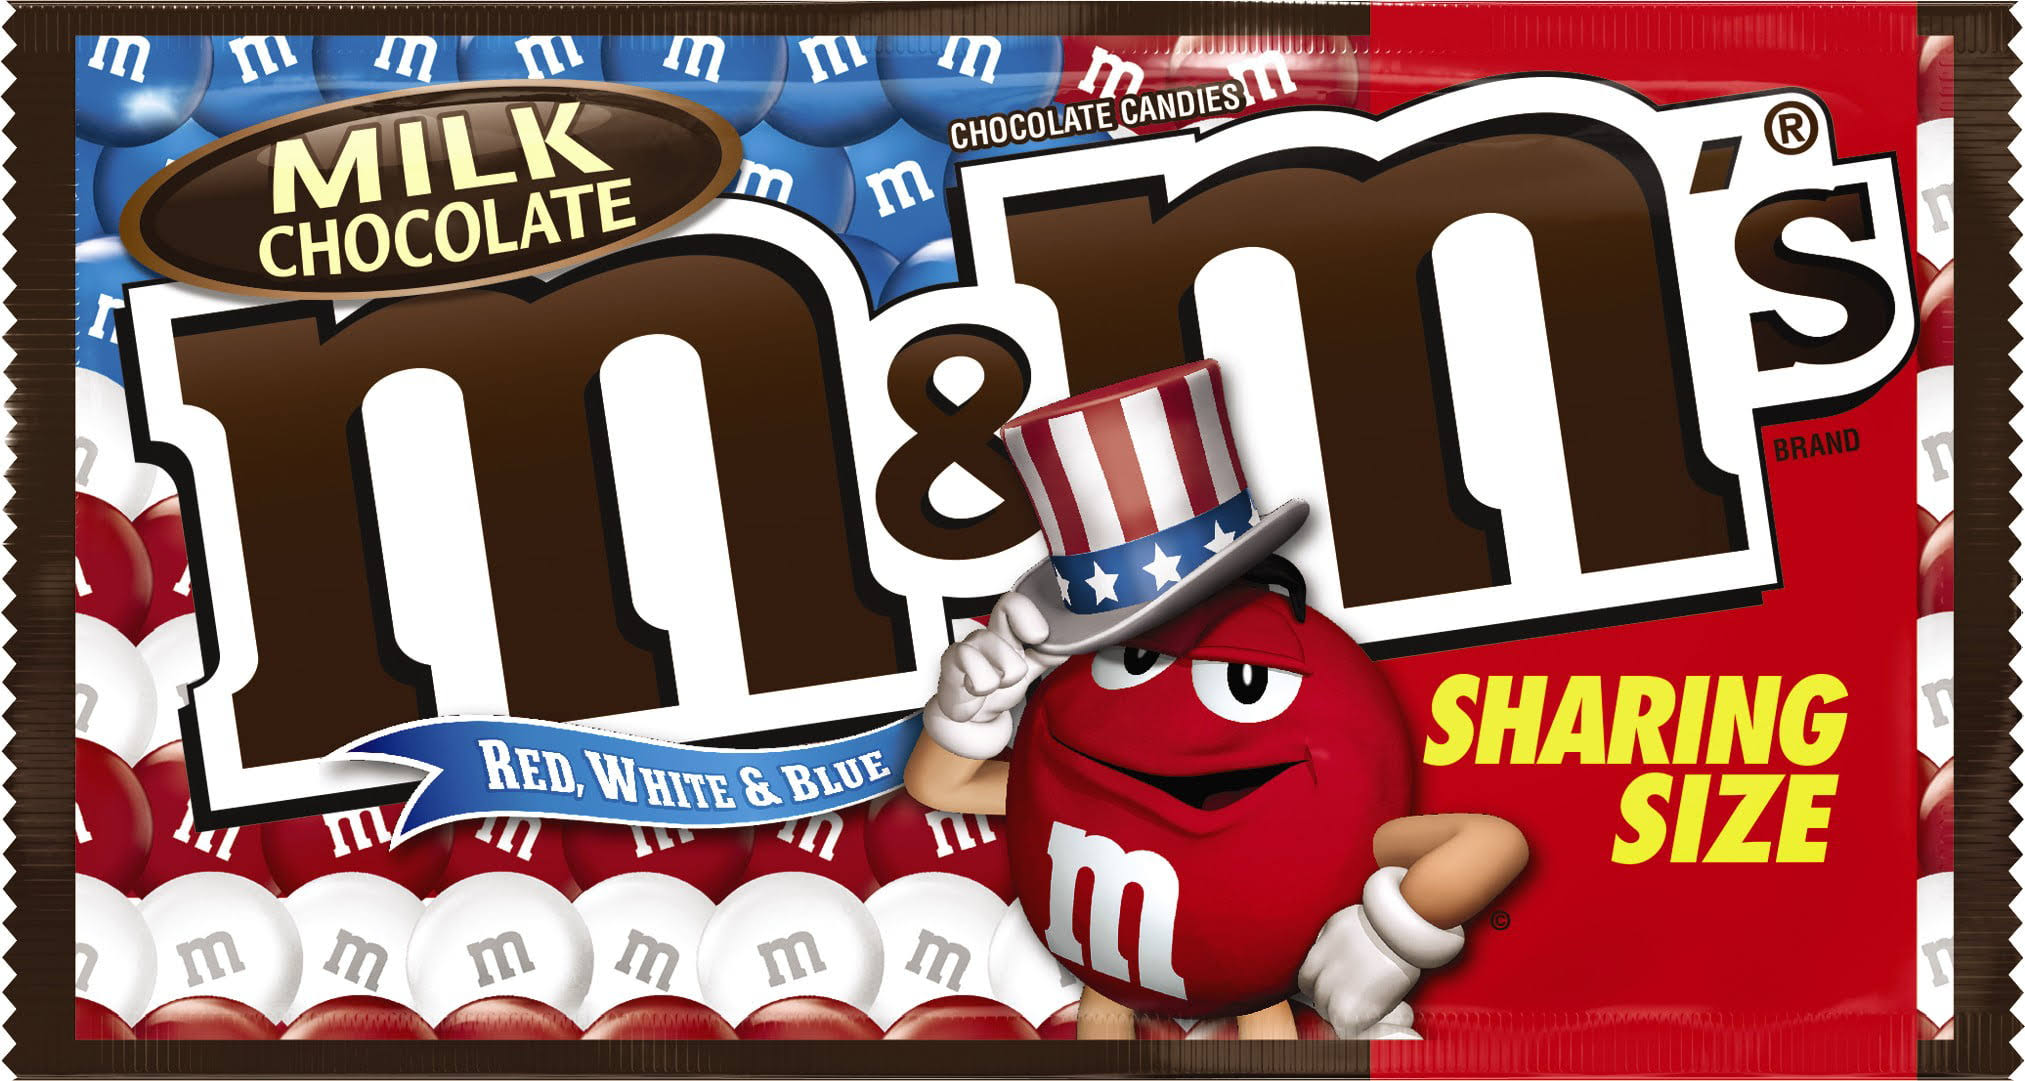 M&M's Chocolate Candies, Milk Chocolate, Red, White & Blue Mix, Share Size - 3.14 oz